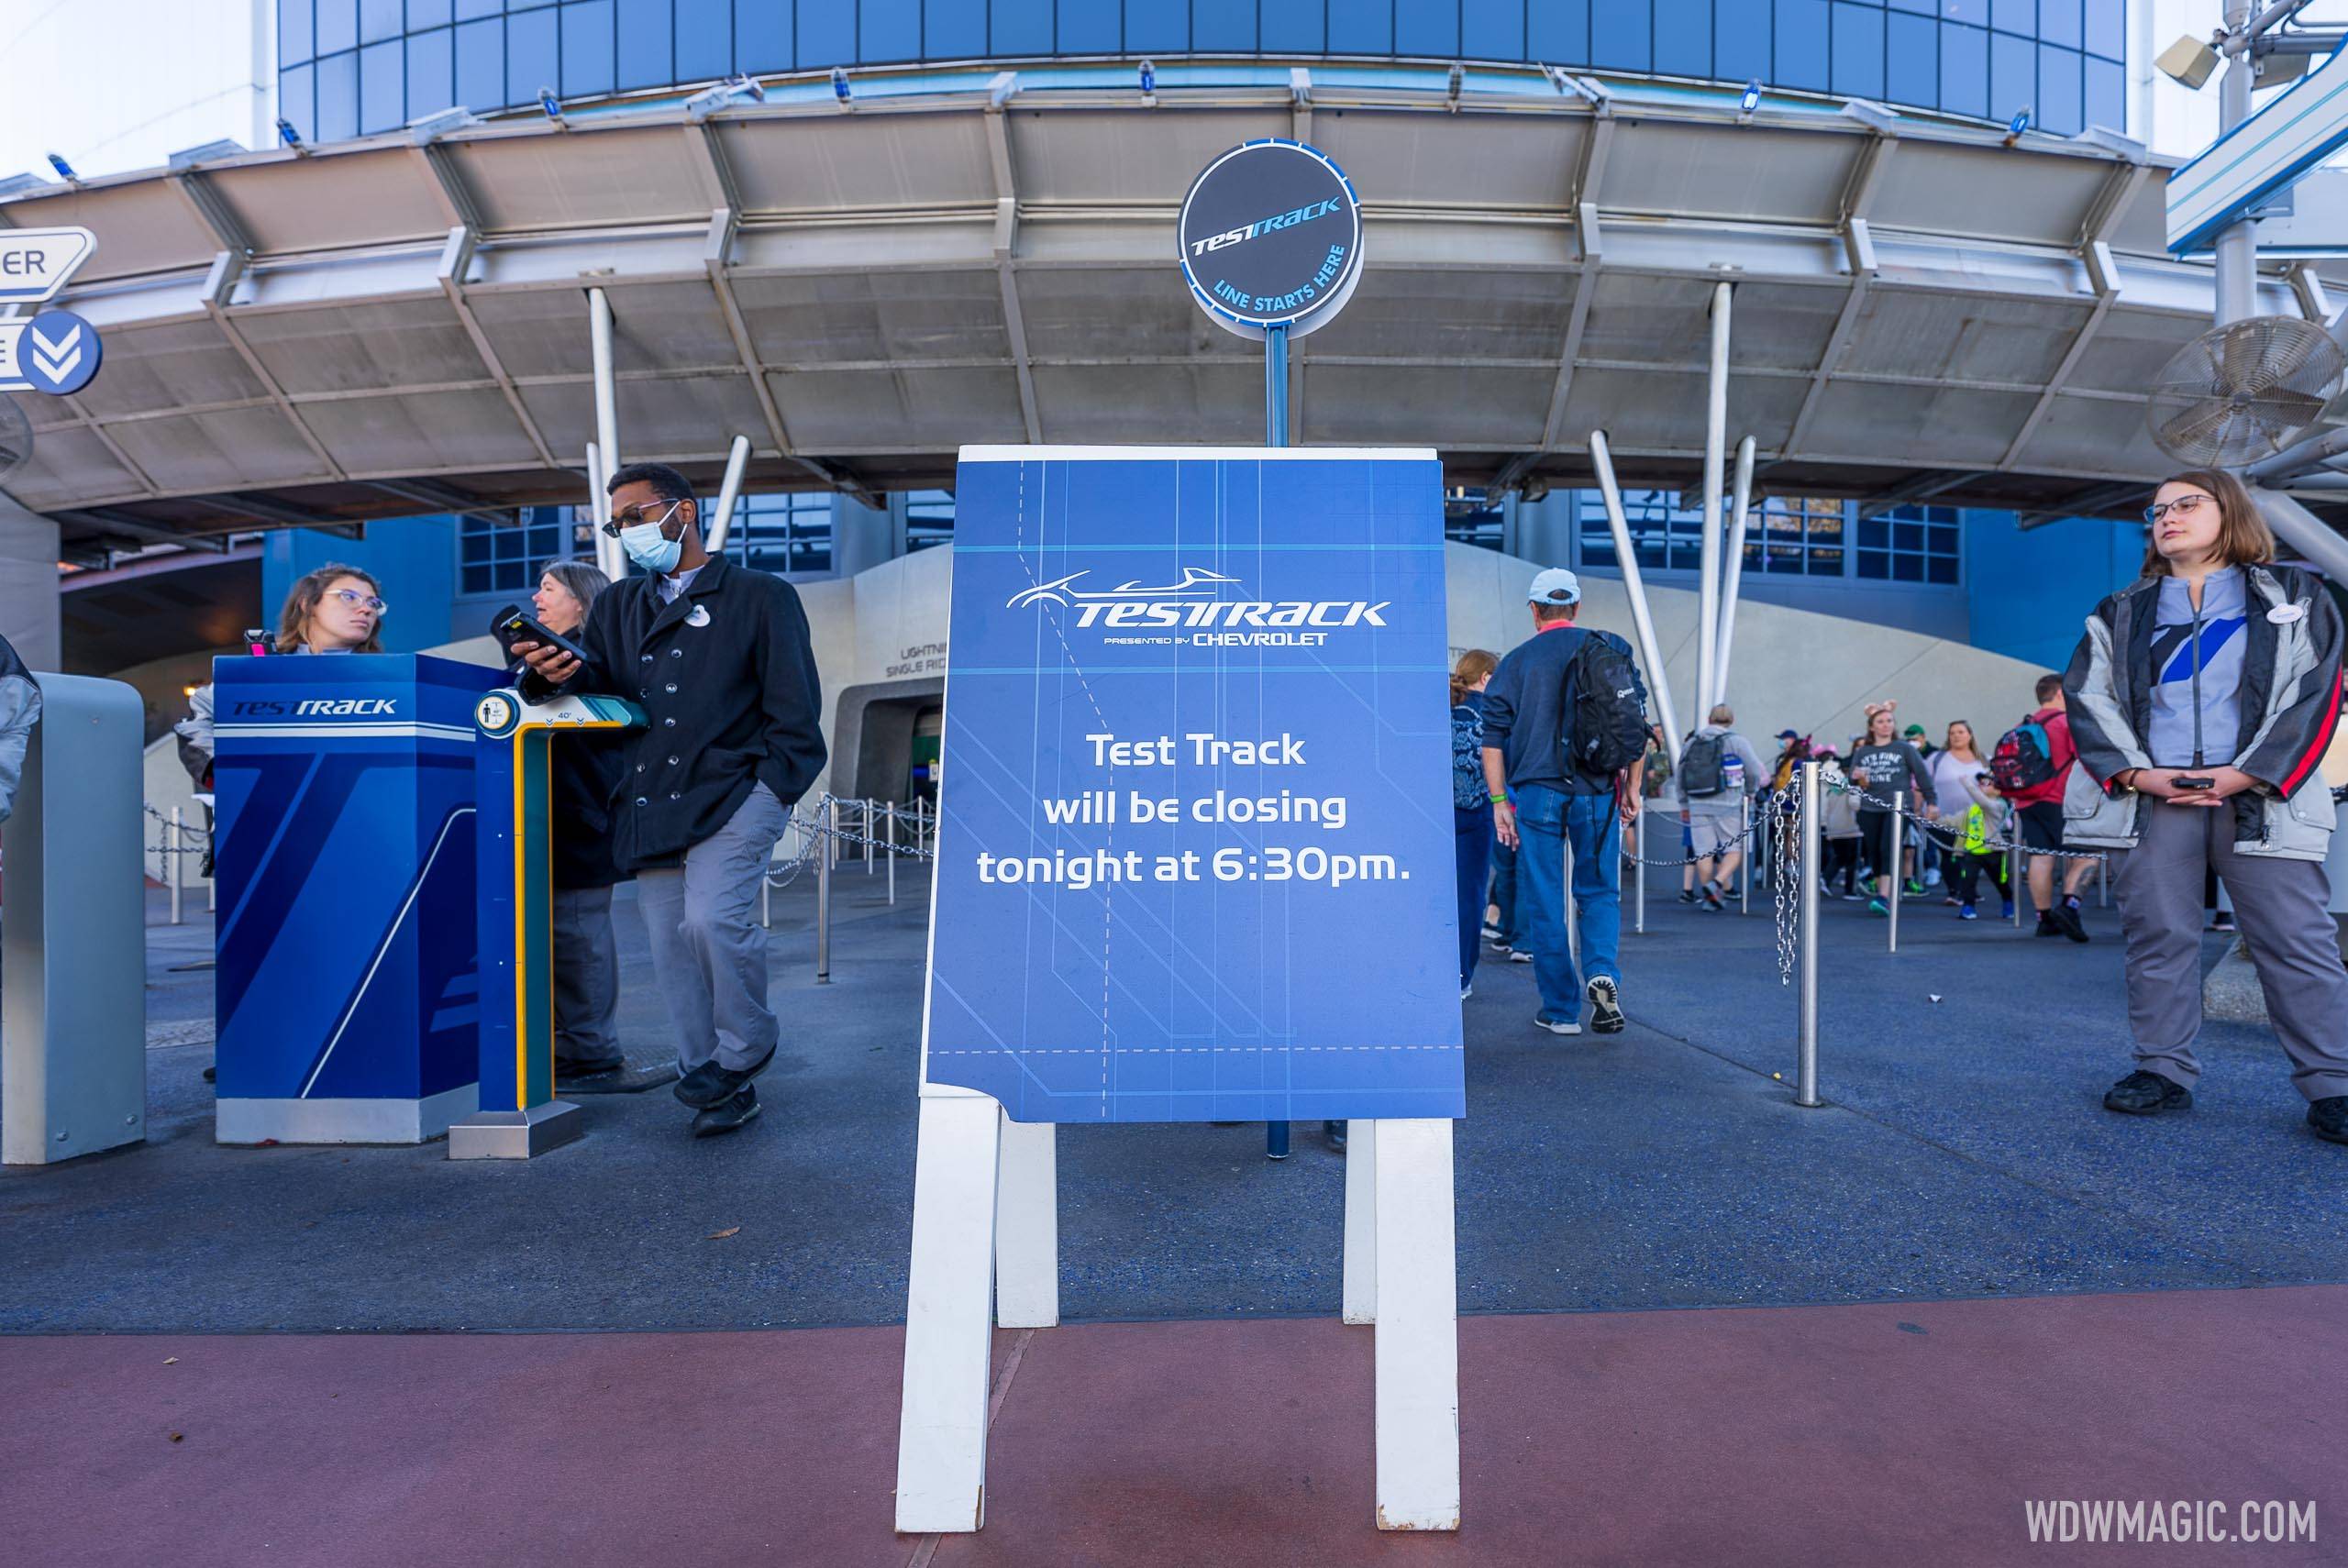 Test Track early closure